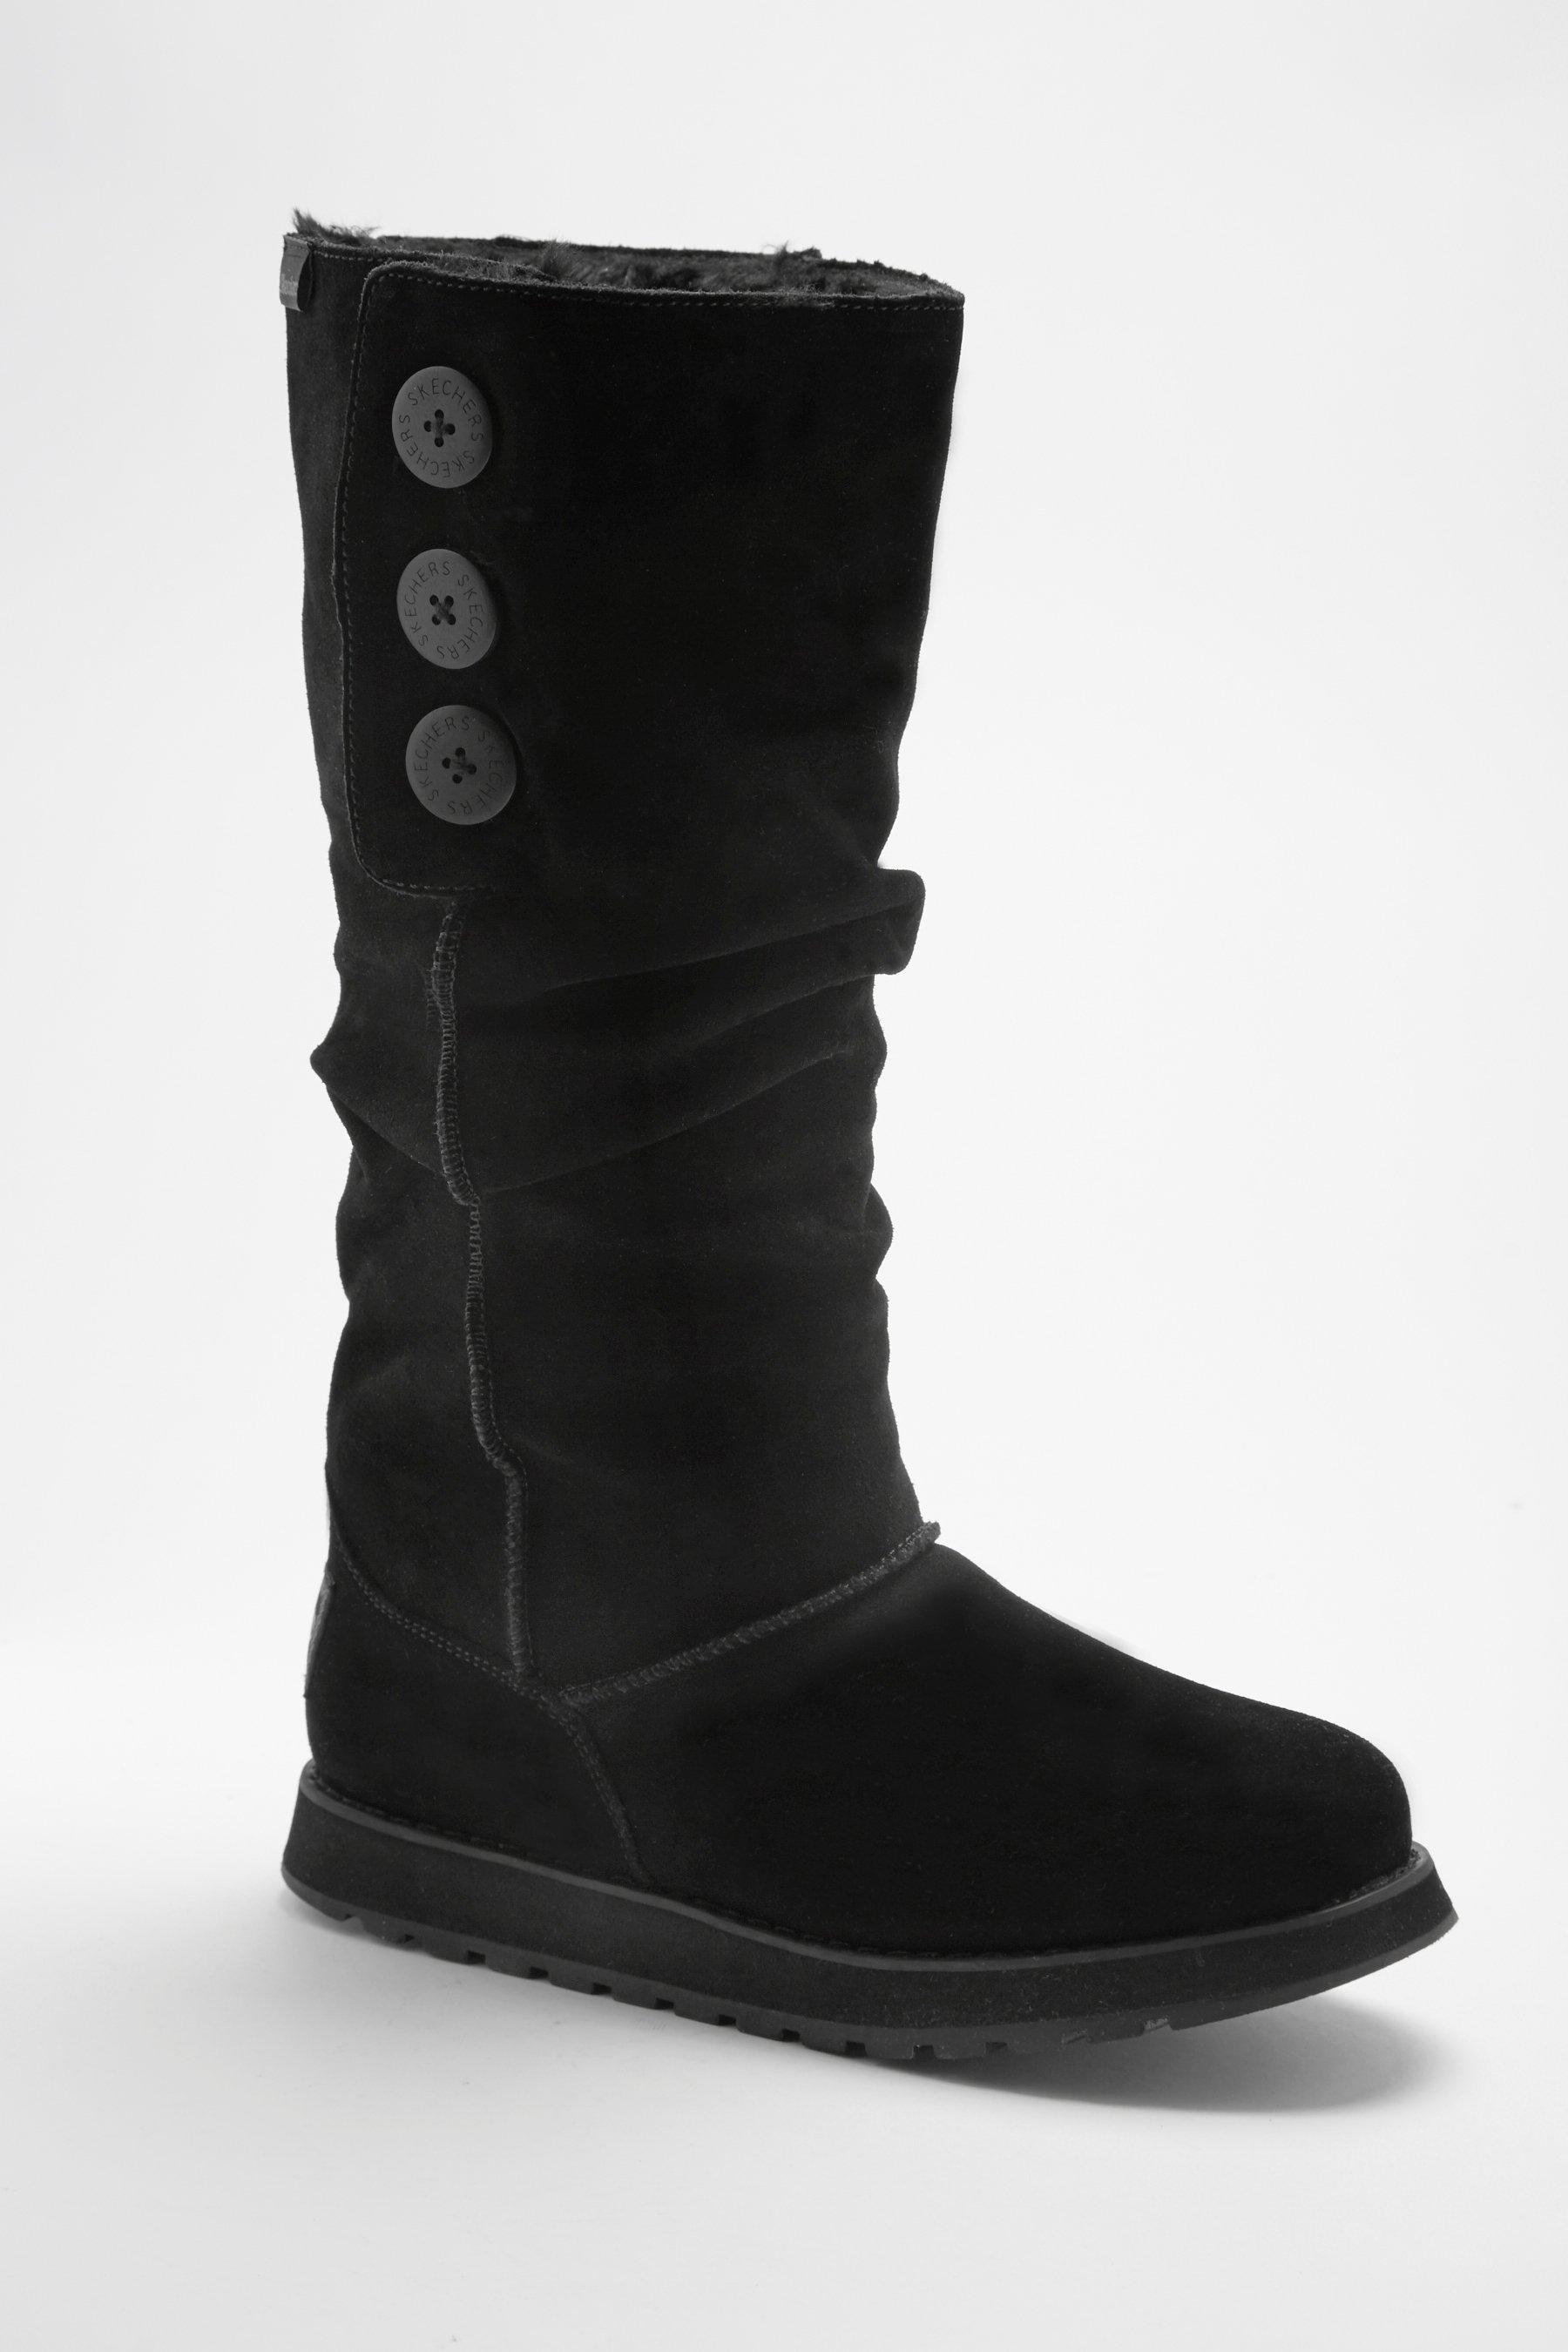 skechers keepsake tall boots Sale,up to 